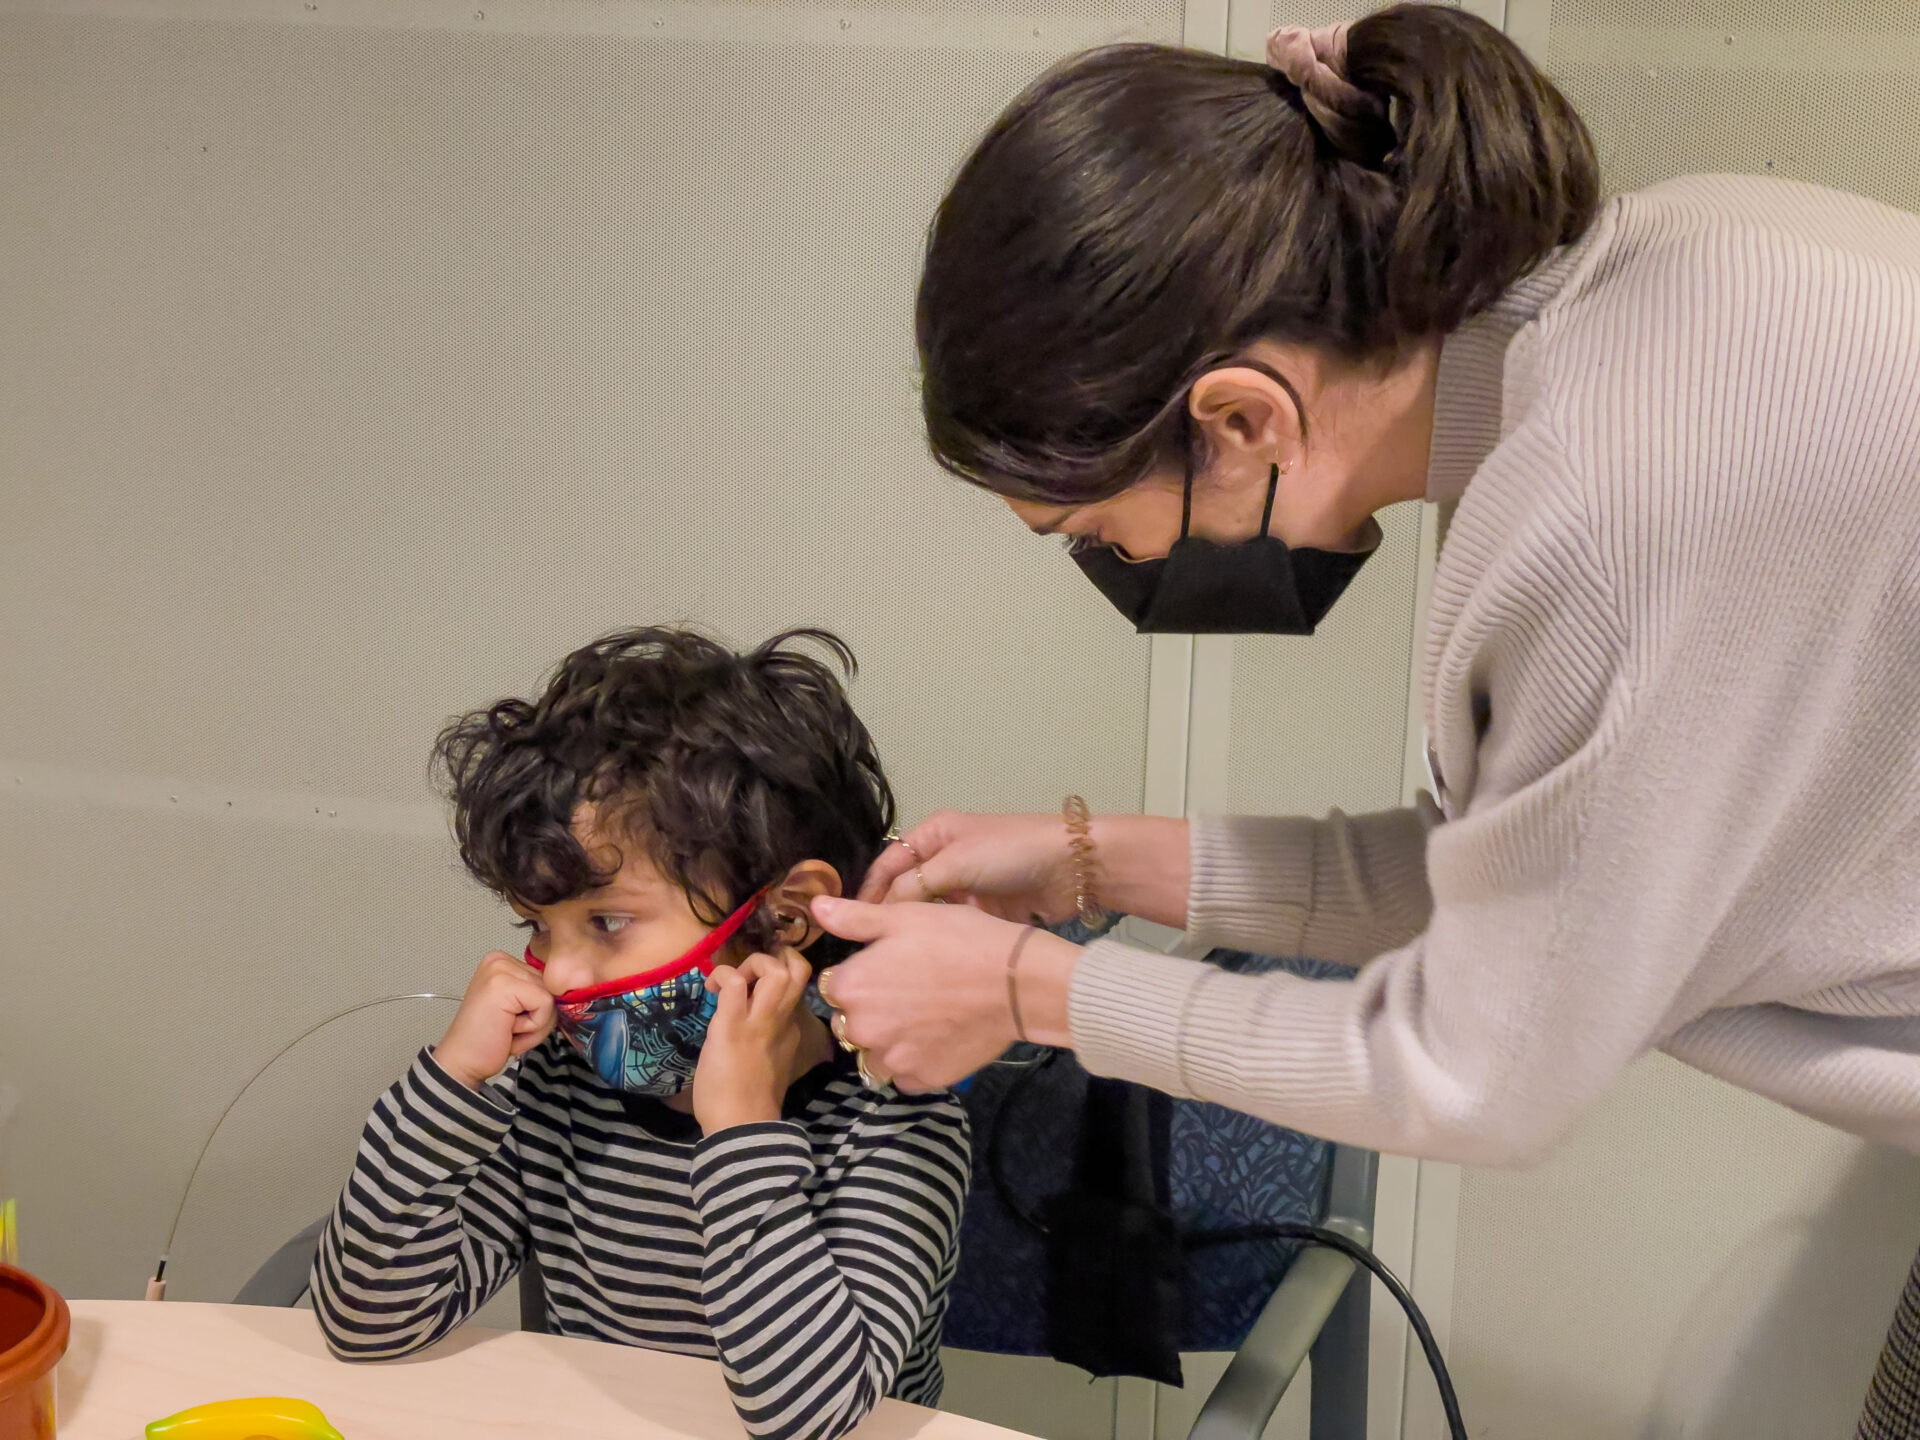 A kid and a doctor during an ear screening